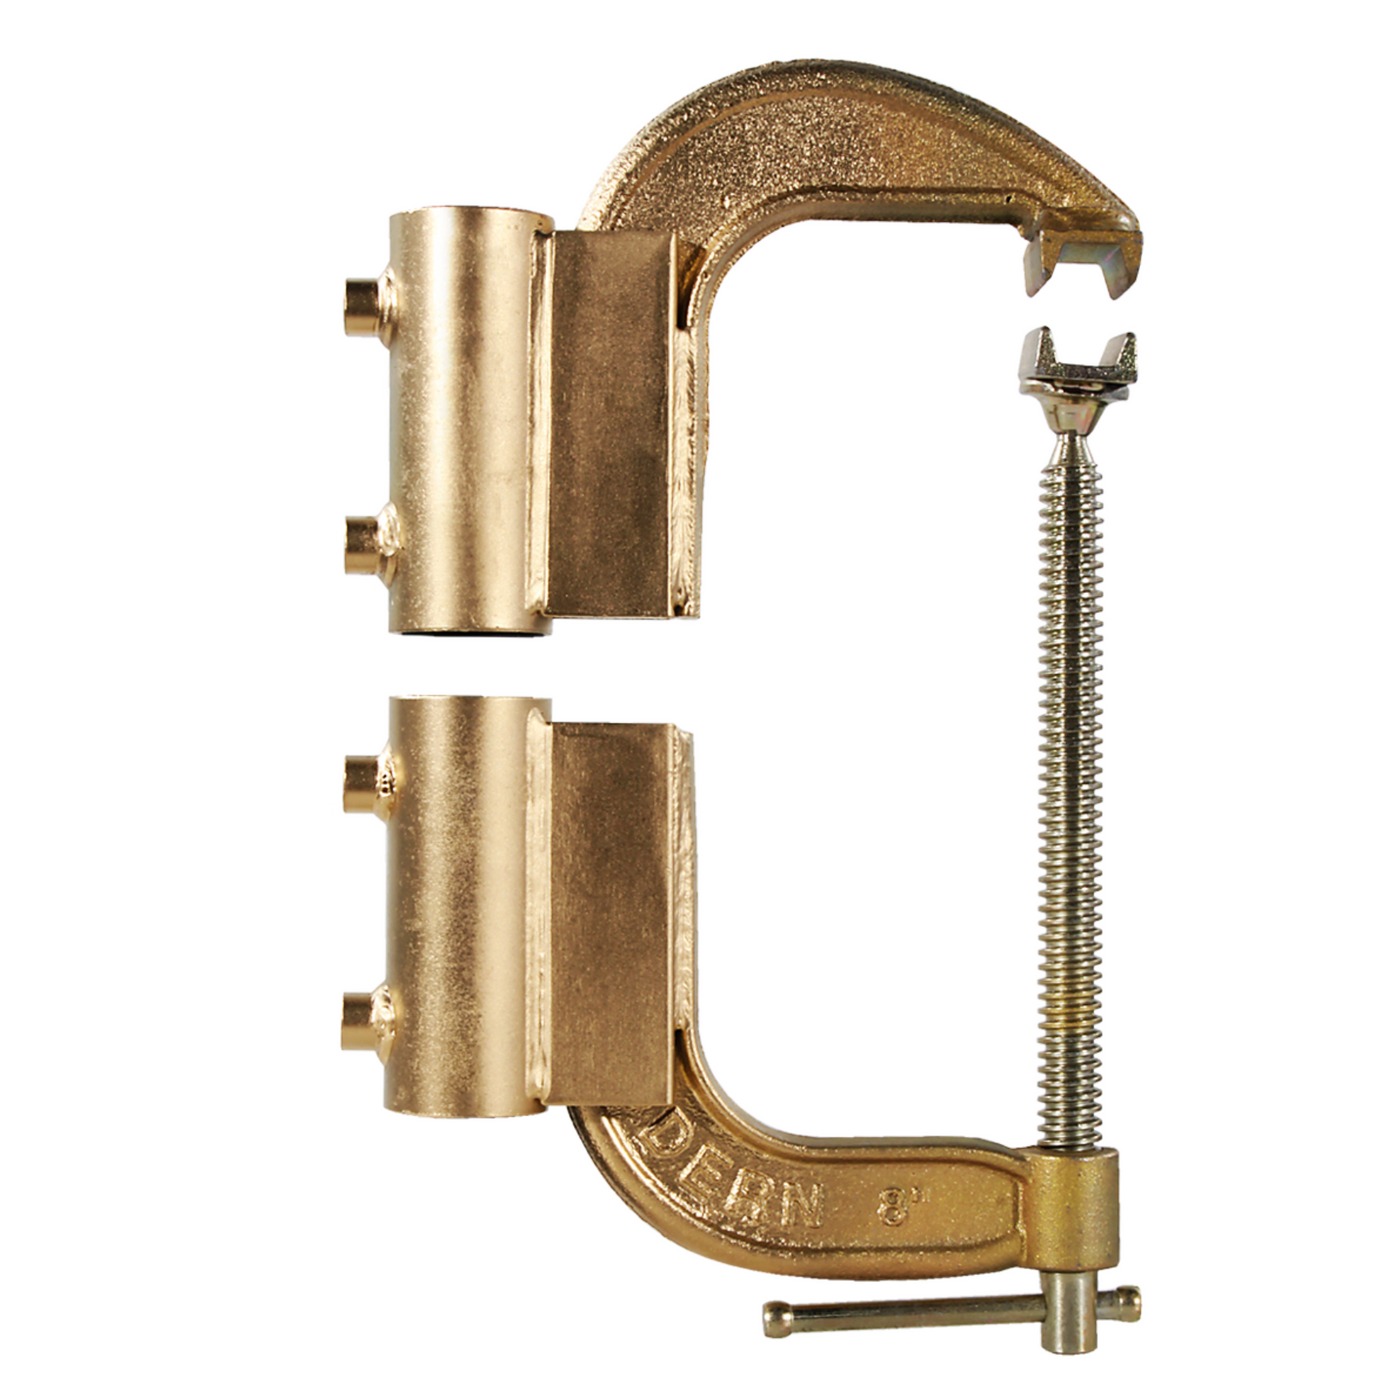 Modern 1-1/4" Speed C-Clamp for Speed-Rail® in Gold